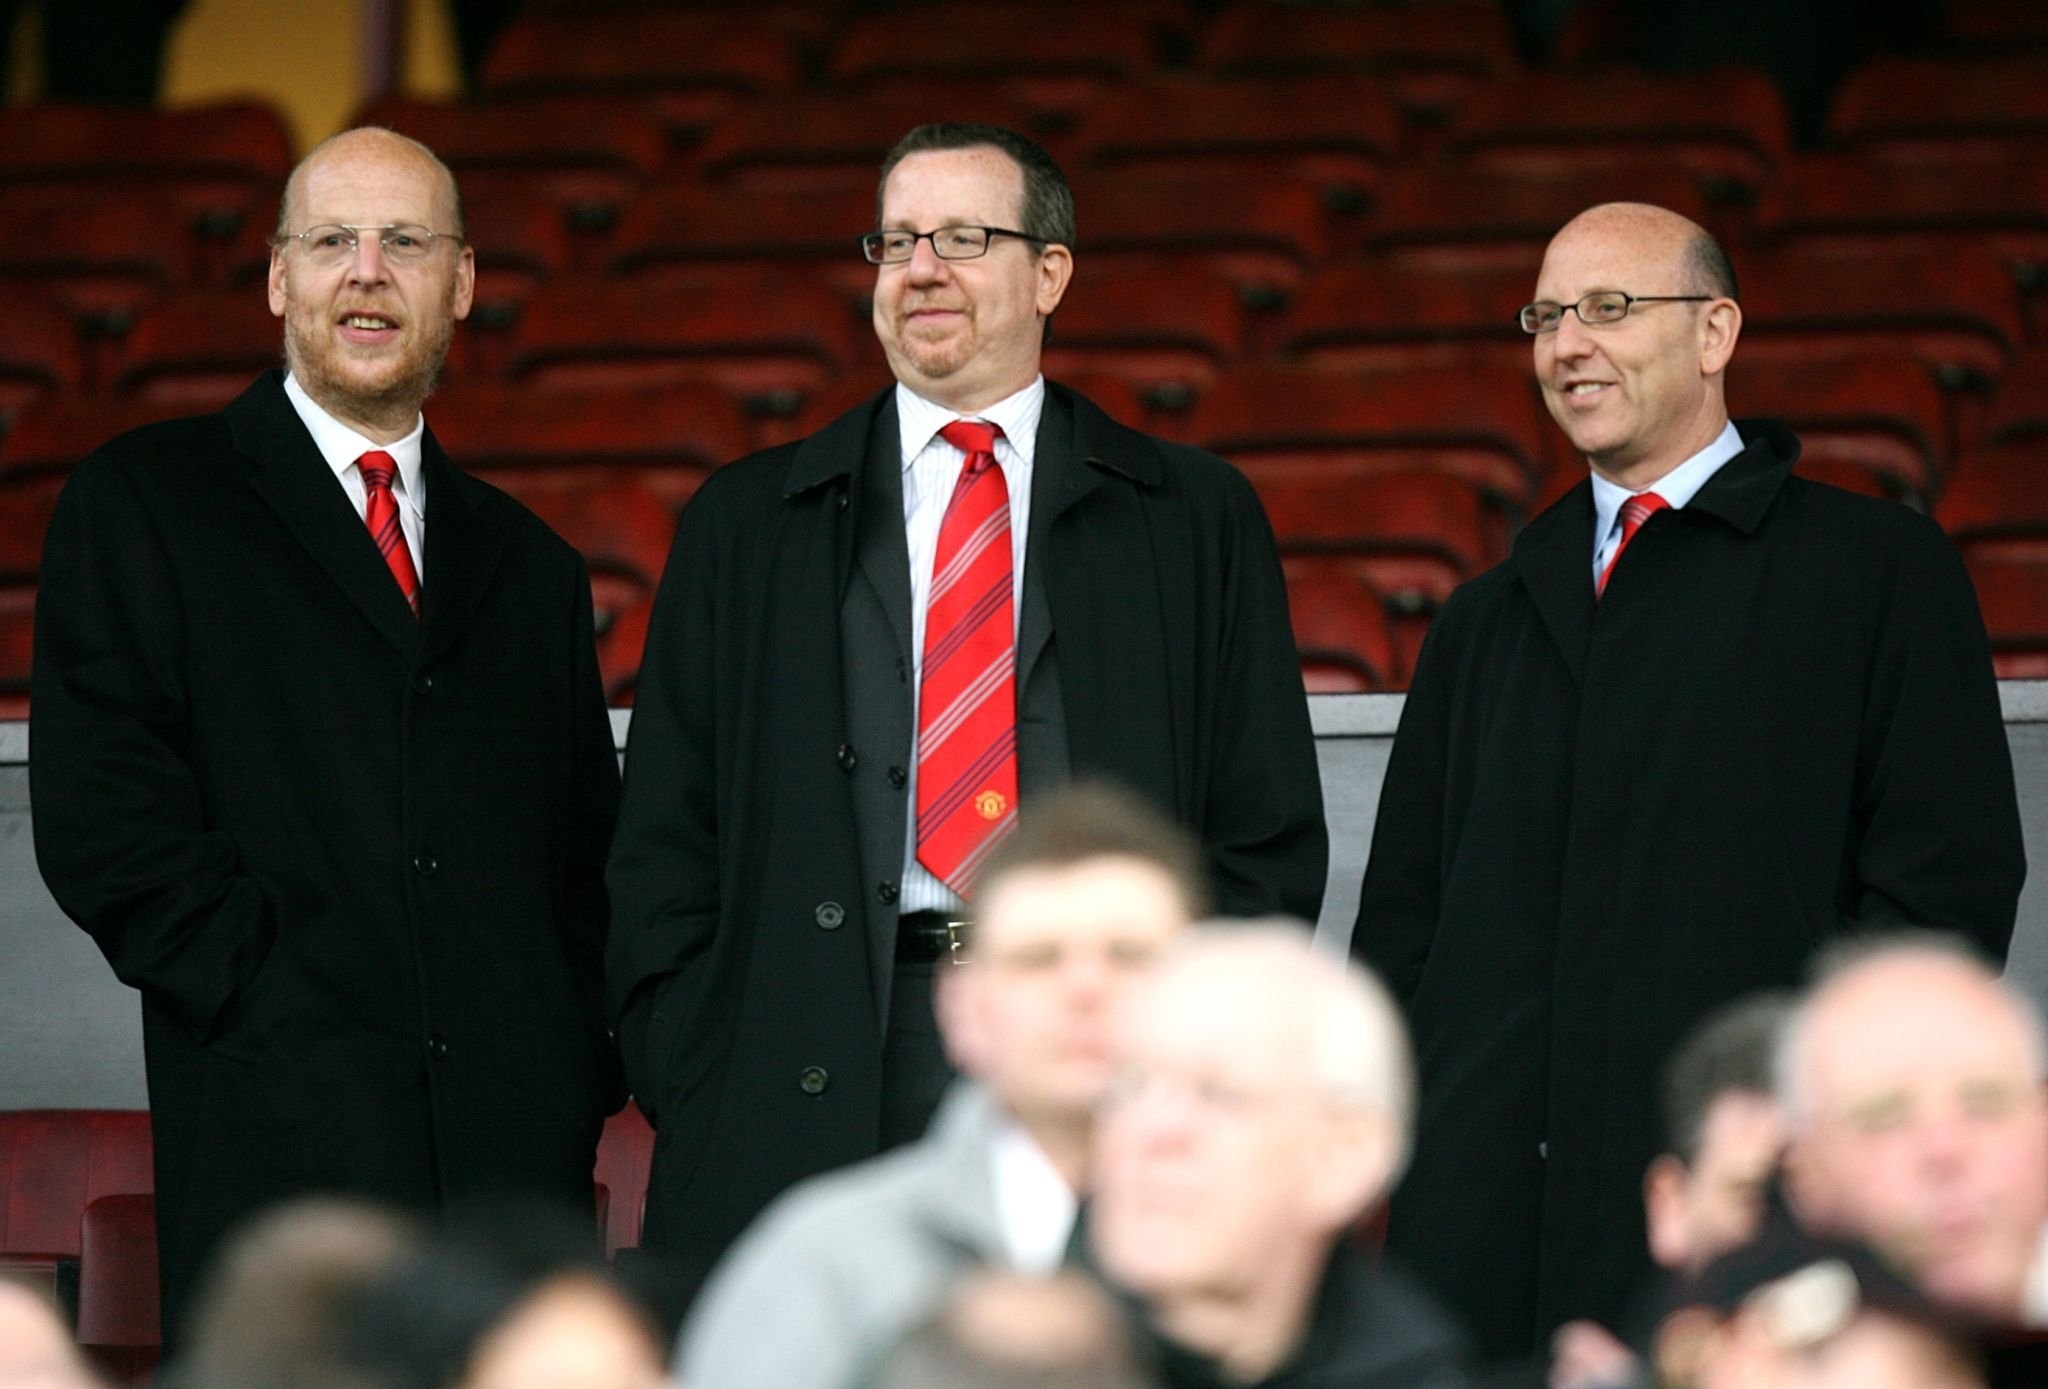 Manchester United Takeover, Manchester United sale could be ruse by the Glazers, Sheik Jassim delays bid for Man United, Jim Ratcliffe, Glazer brothers